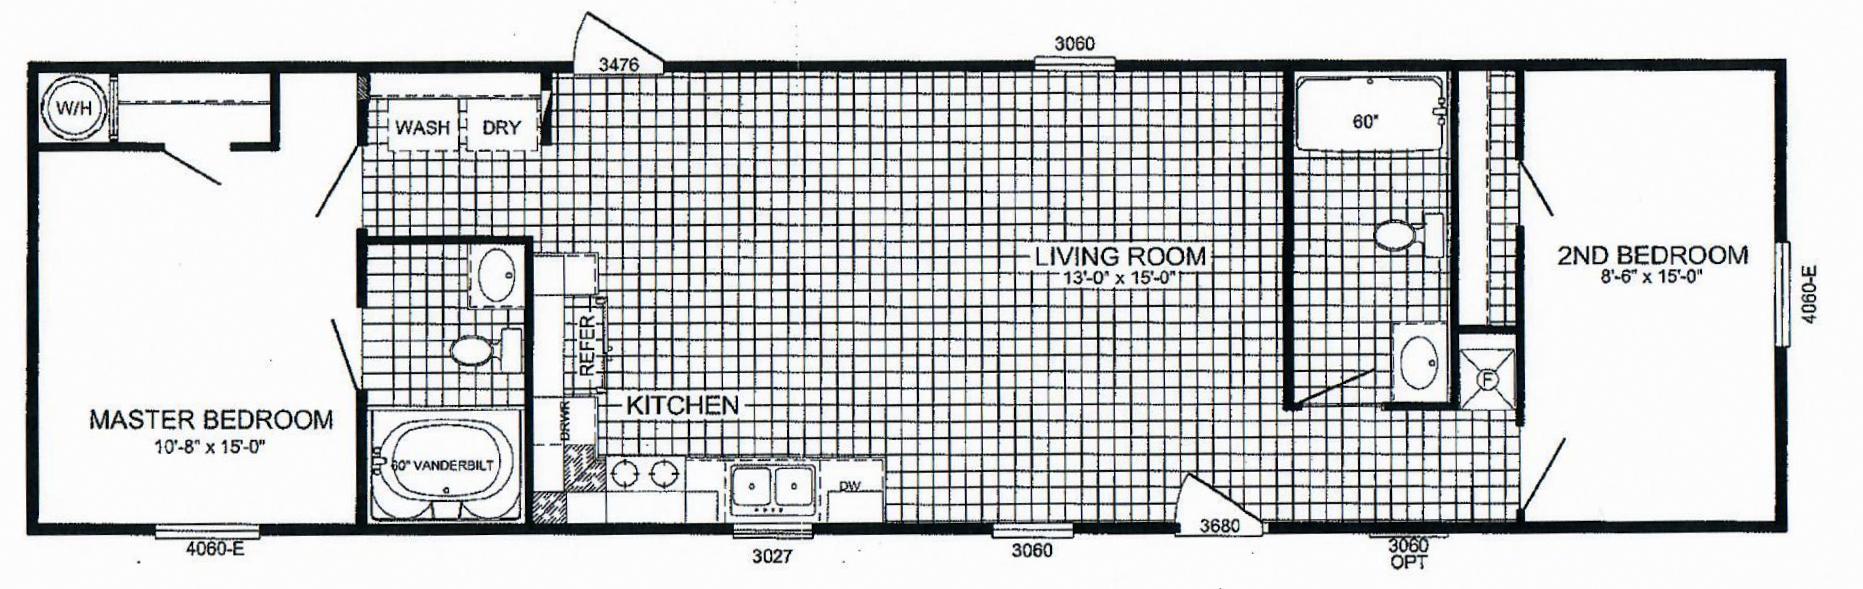 2 Bedroom Floor Plans | Modular and Manufactured Homes Archives - Hawks